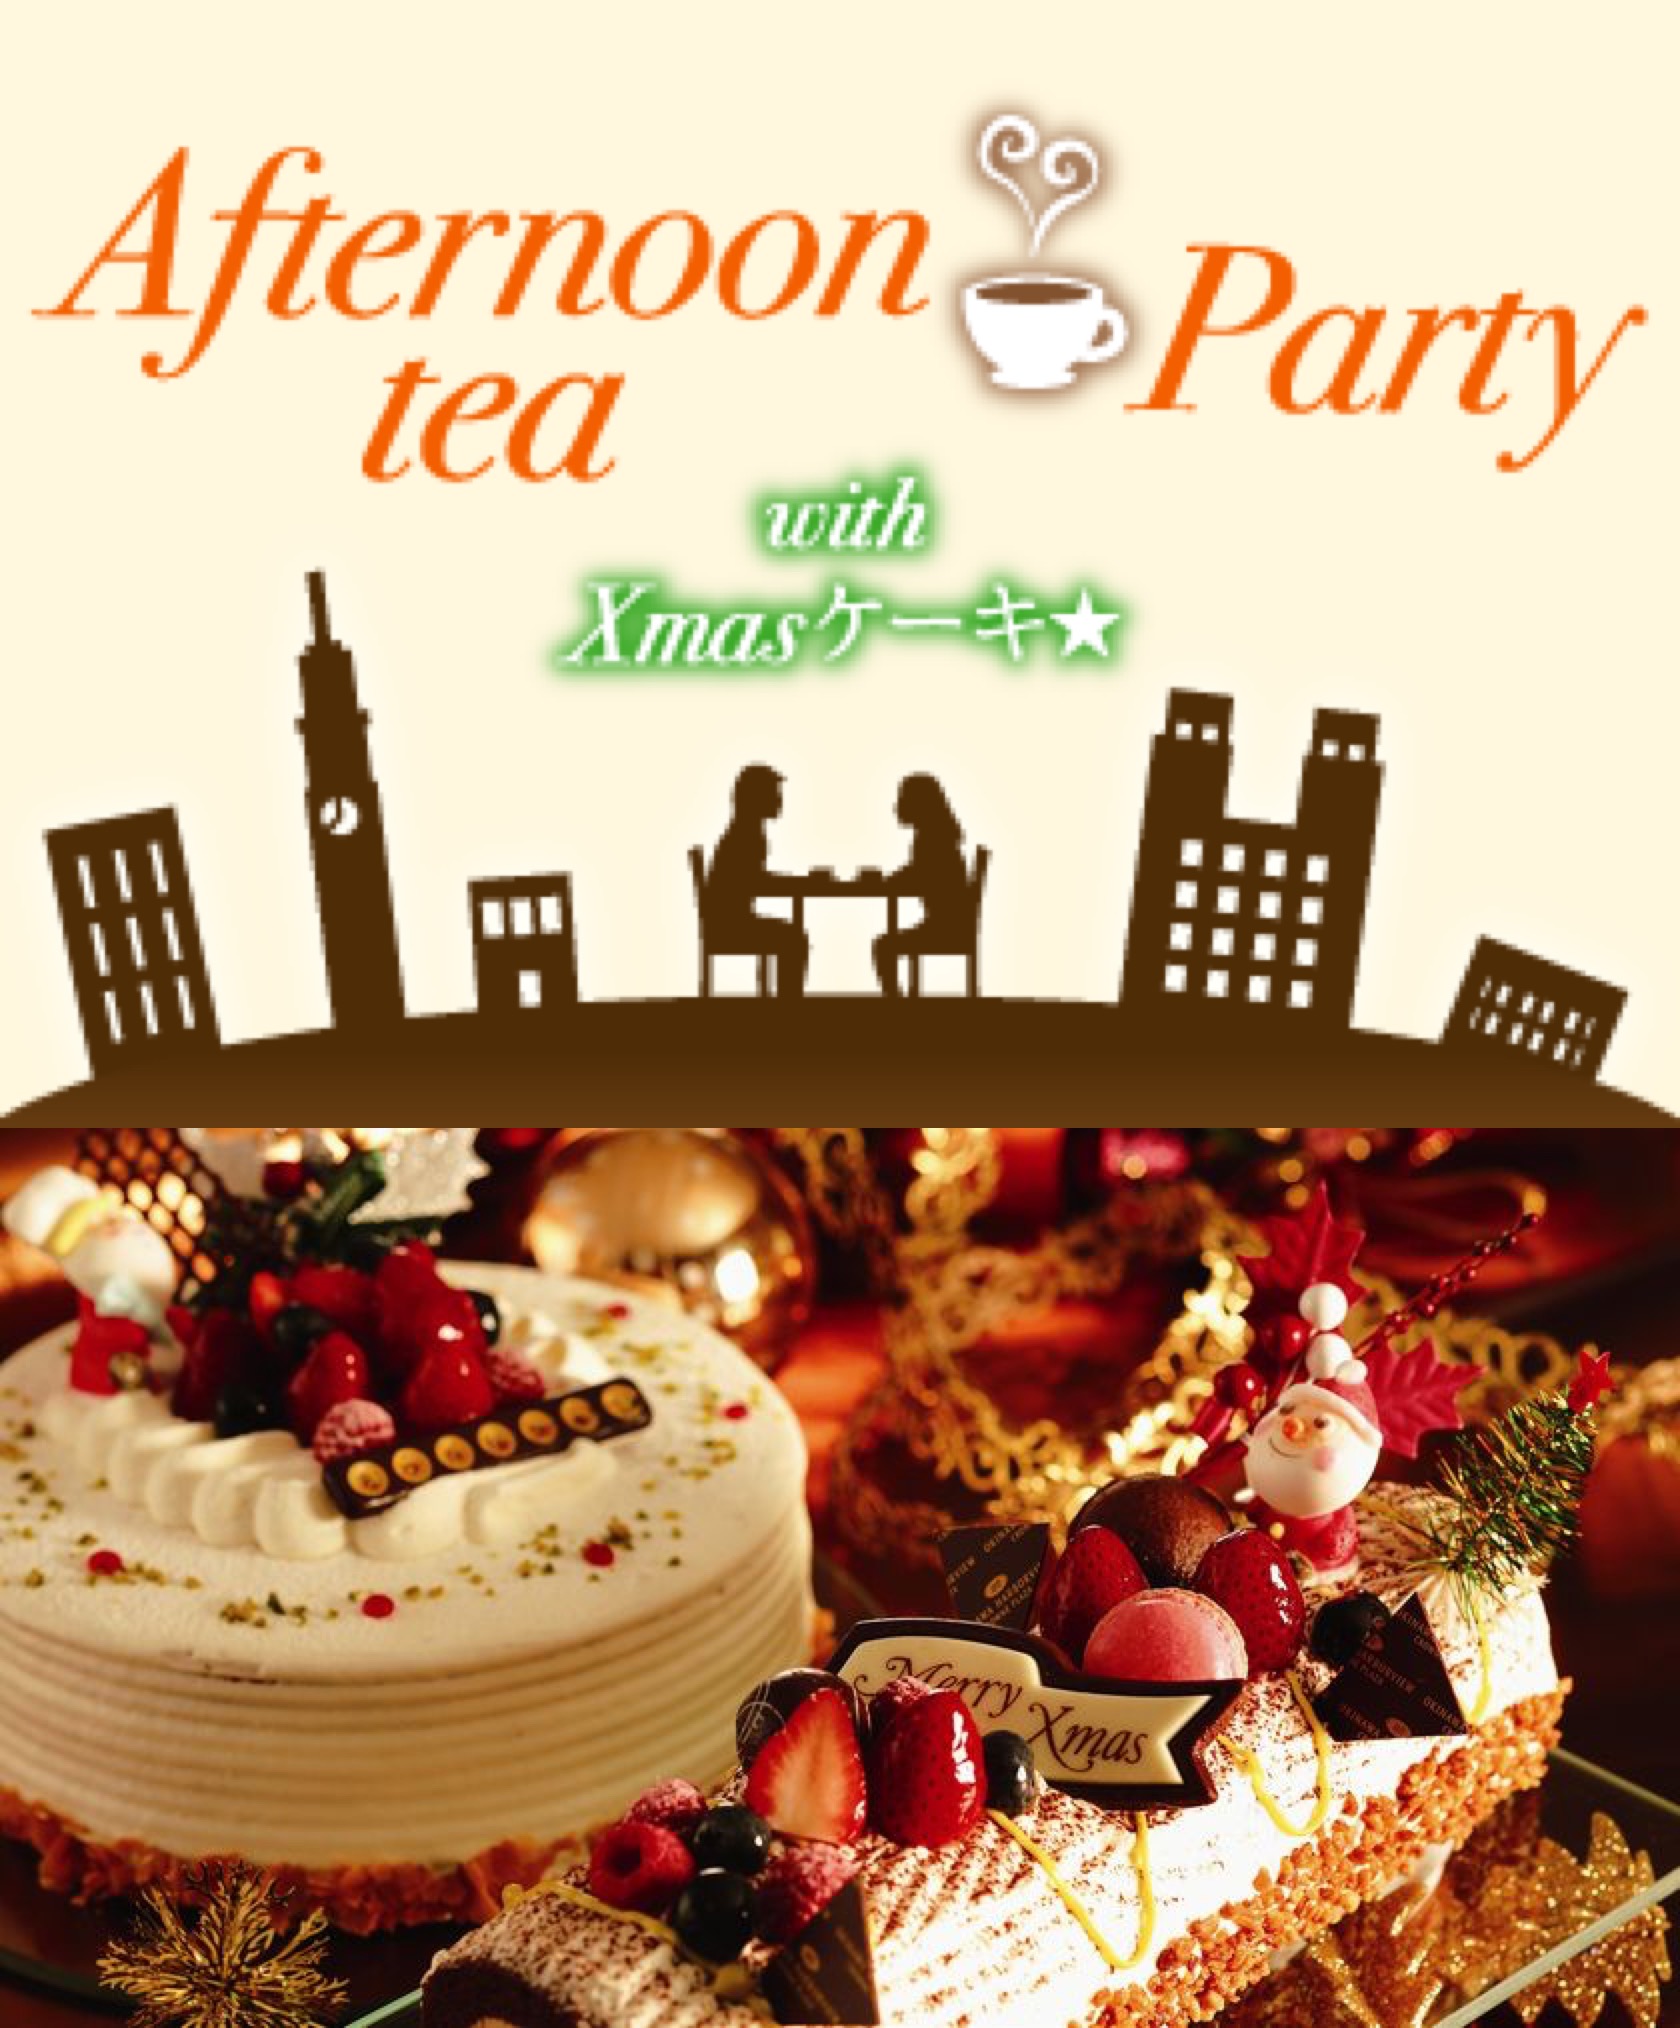 Afternoon tea　Party with Xmasケーキ★のイメージ写真